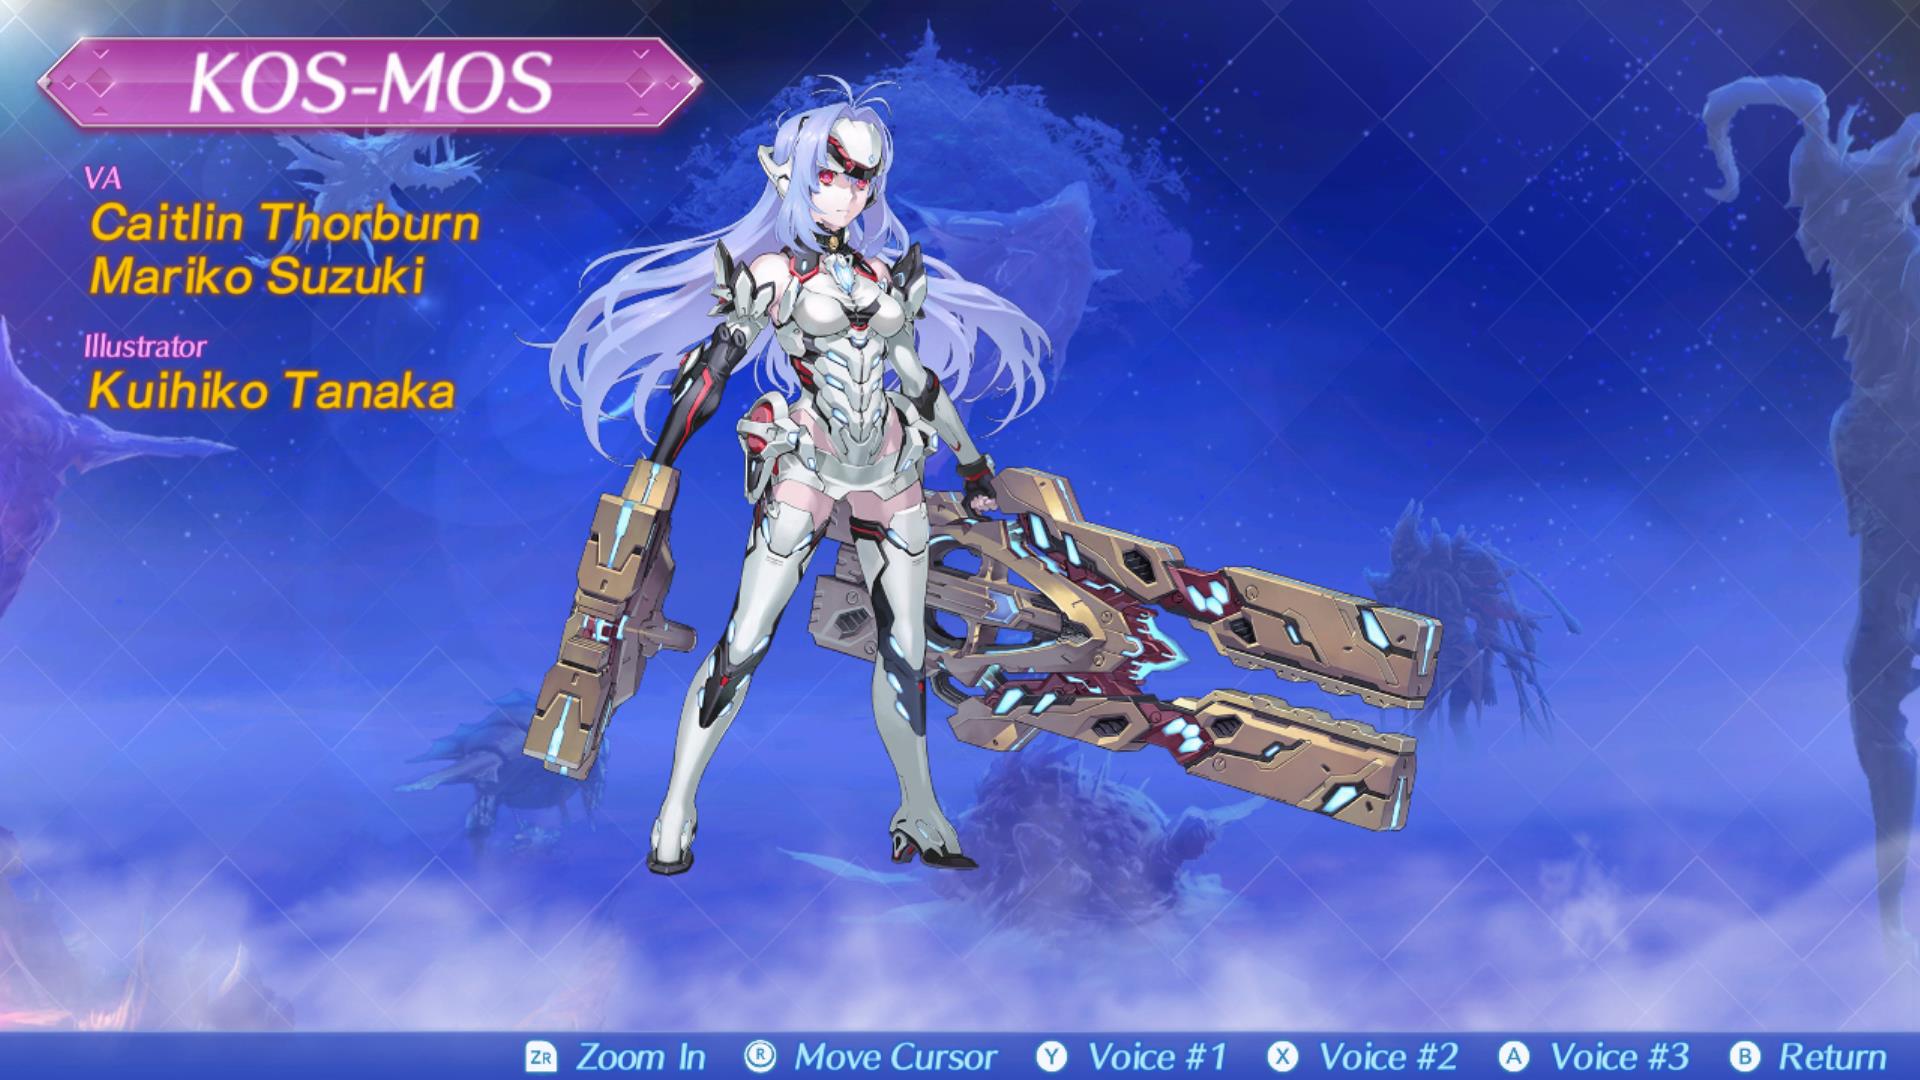 kos-mos and kos-mos re: (xenoblade chronicles and 2 more) drawn by